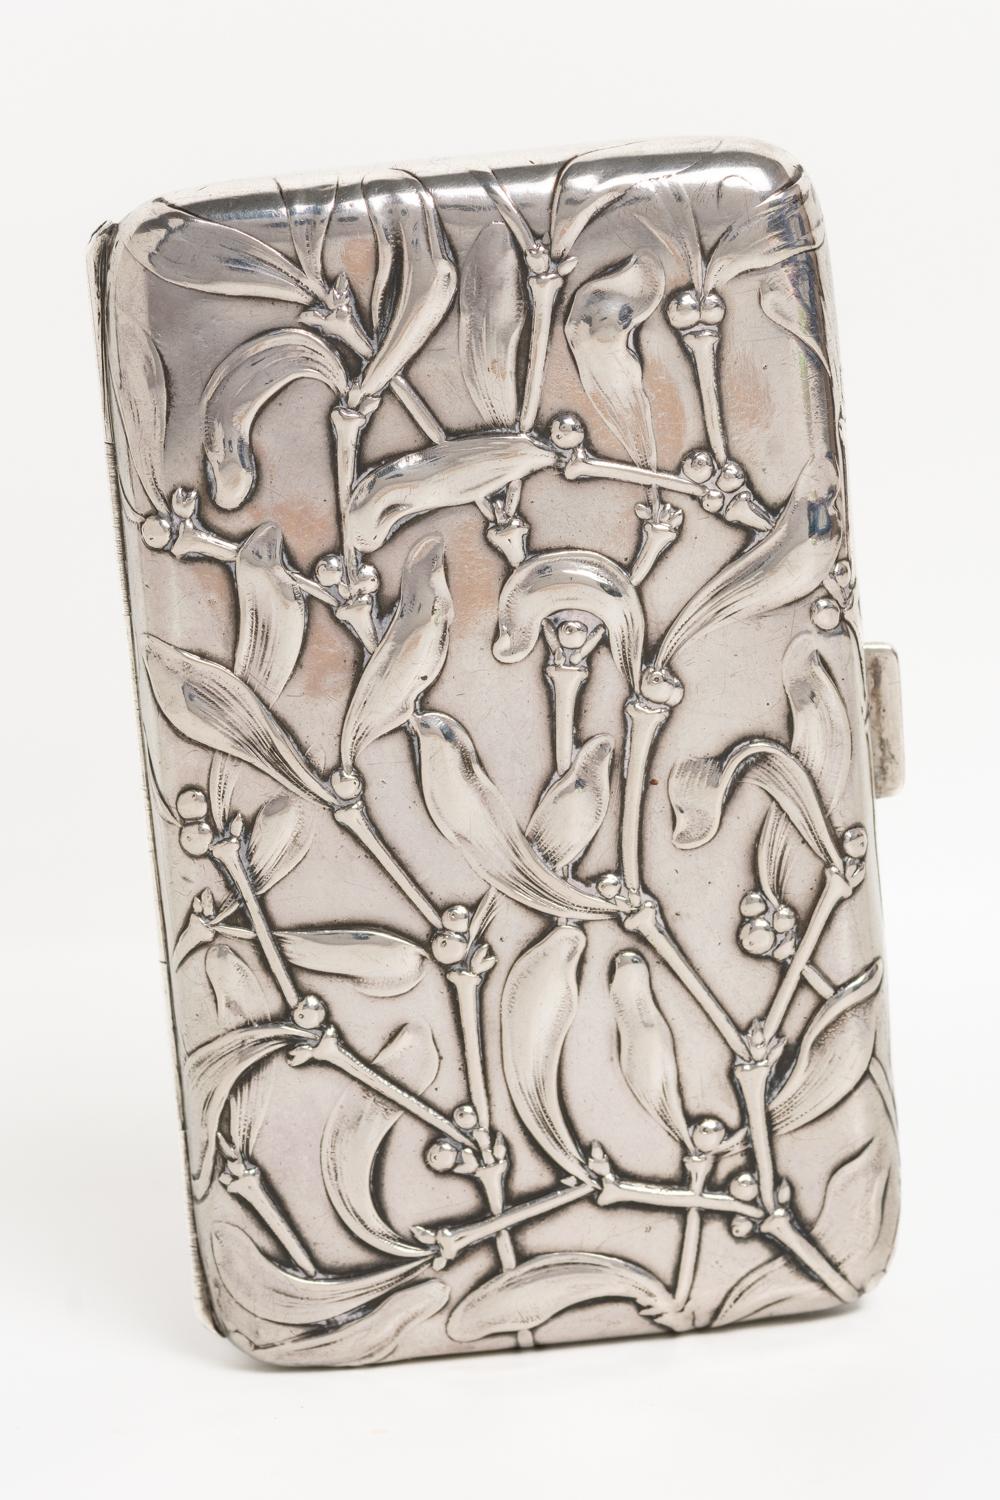 This beautiful and finely crafted German solid silver cigarette case is made circa 1890 and features a beautiful repousse mistletoe design in a very detailed Art Nouveau style. The large rectangular case opens to reveal silver gilt interior and